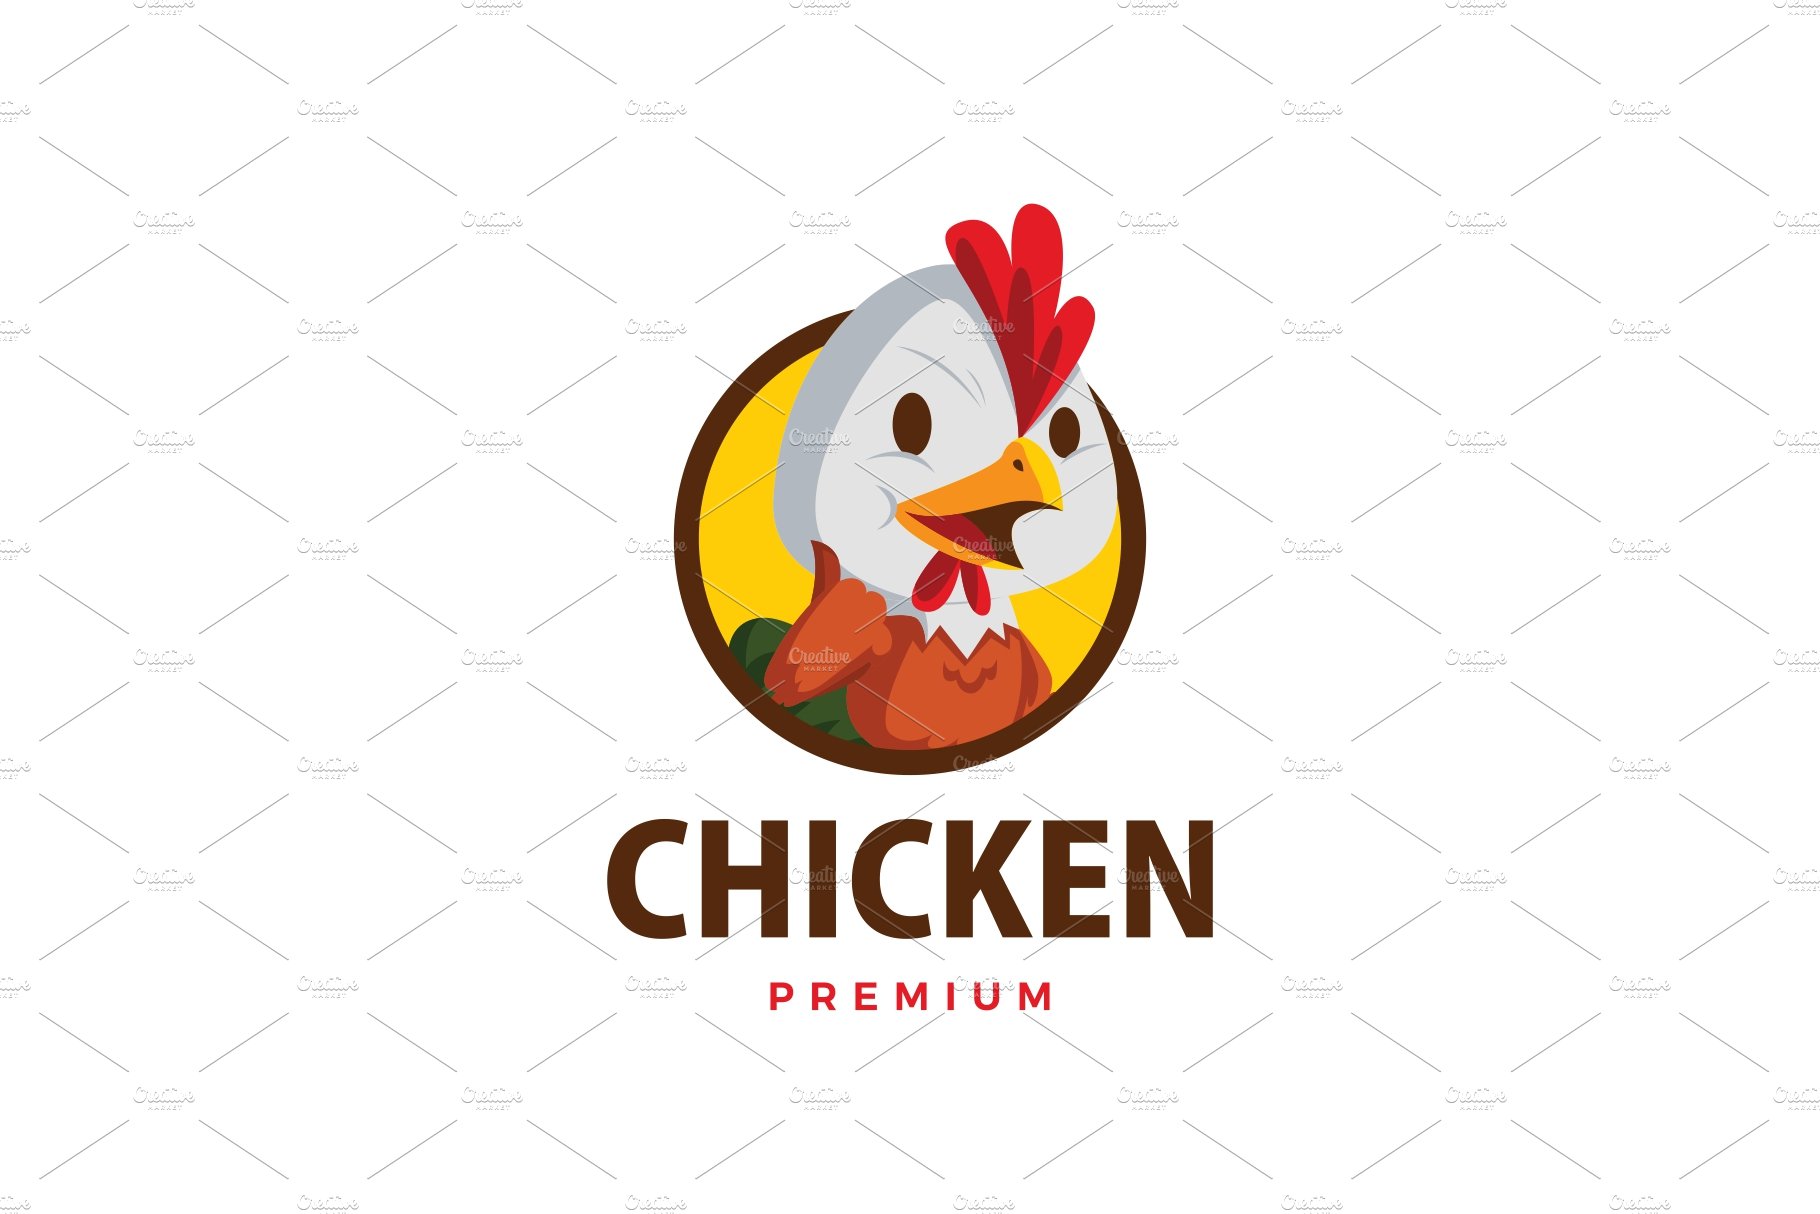 chicken thumb up mascot character cover image.